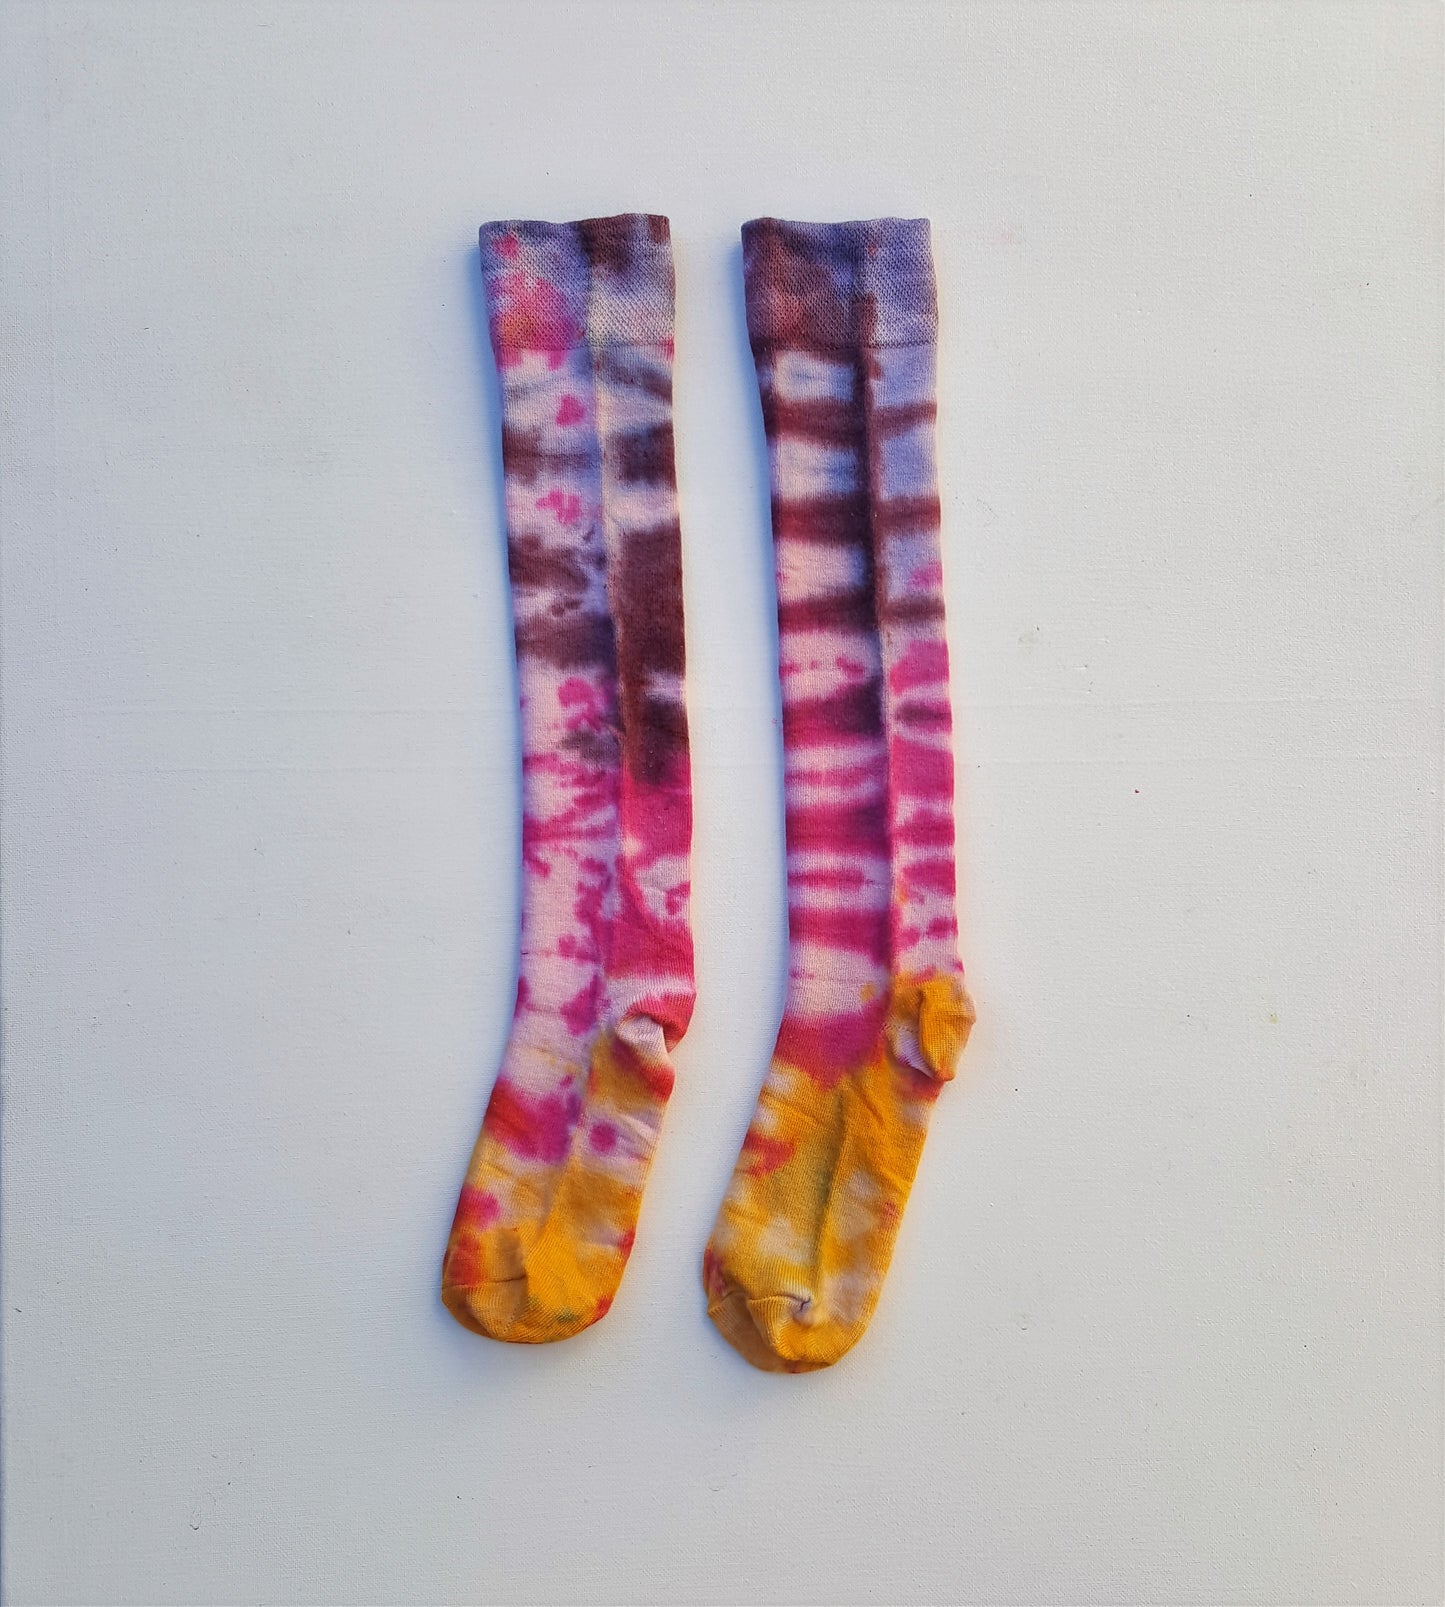 One pair of hand dyed bamboo knee high socks, in ice tie dye colours. Each is pair is unique and hand dyed with love, several colour options available.  Made with natural organic bamboo fibres, light and breathable. 80% bamboo, 17% polyamide, 3% elastane .  To fit women's size UK 4-8 - EUR 37-42 - US 6-10